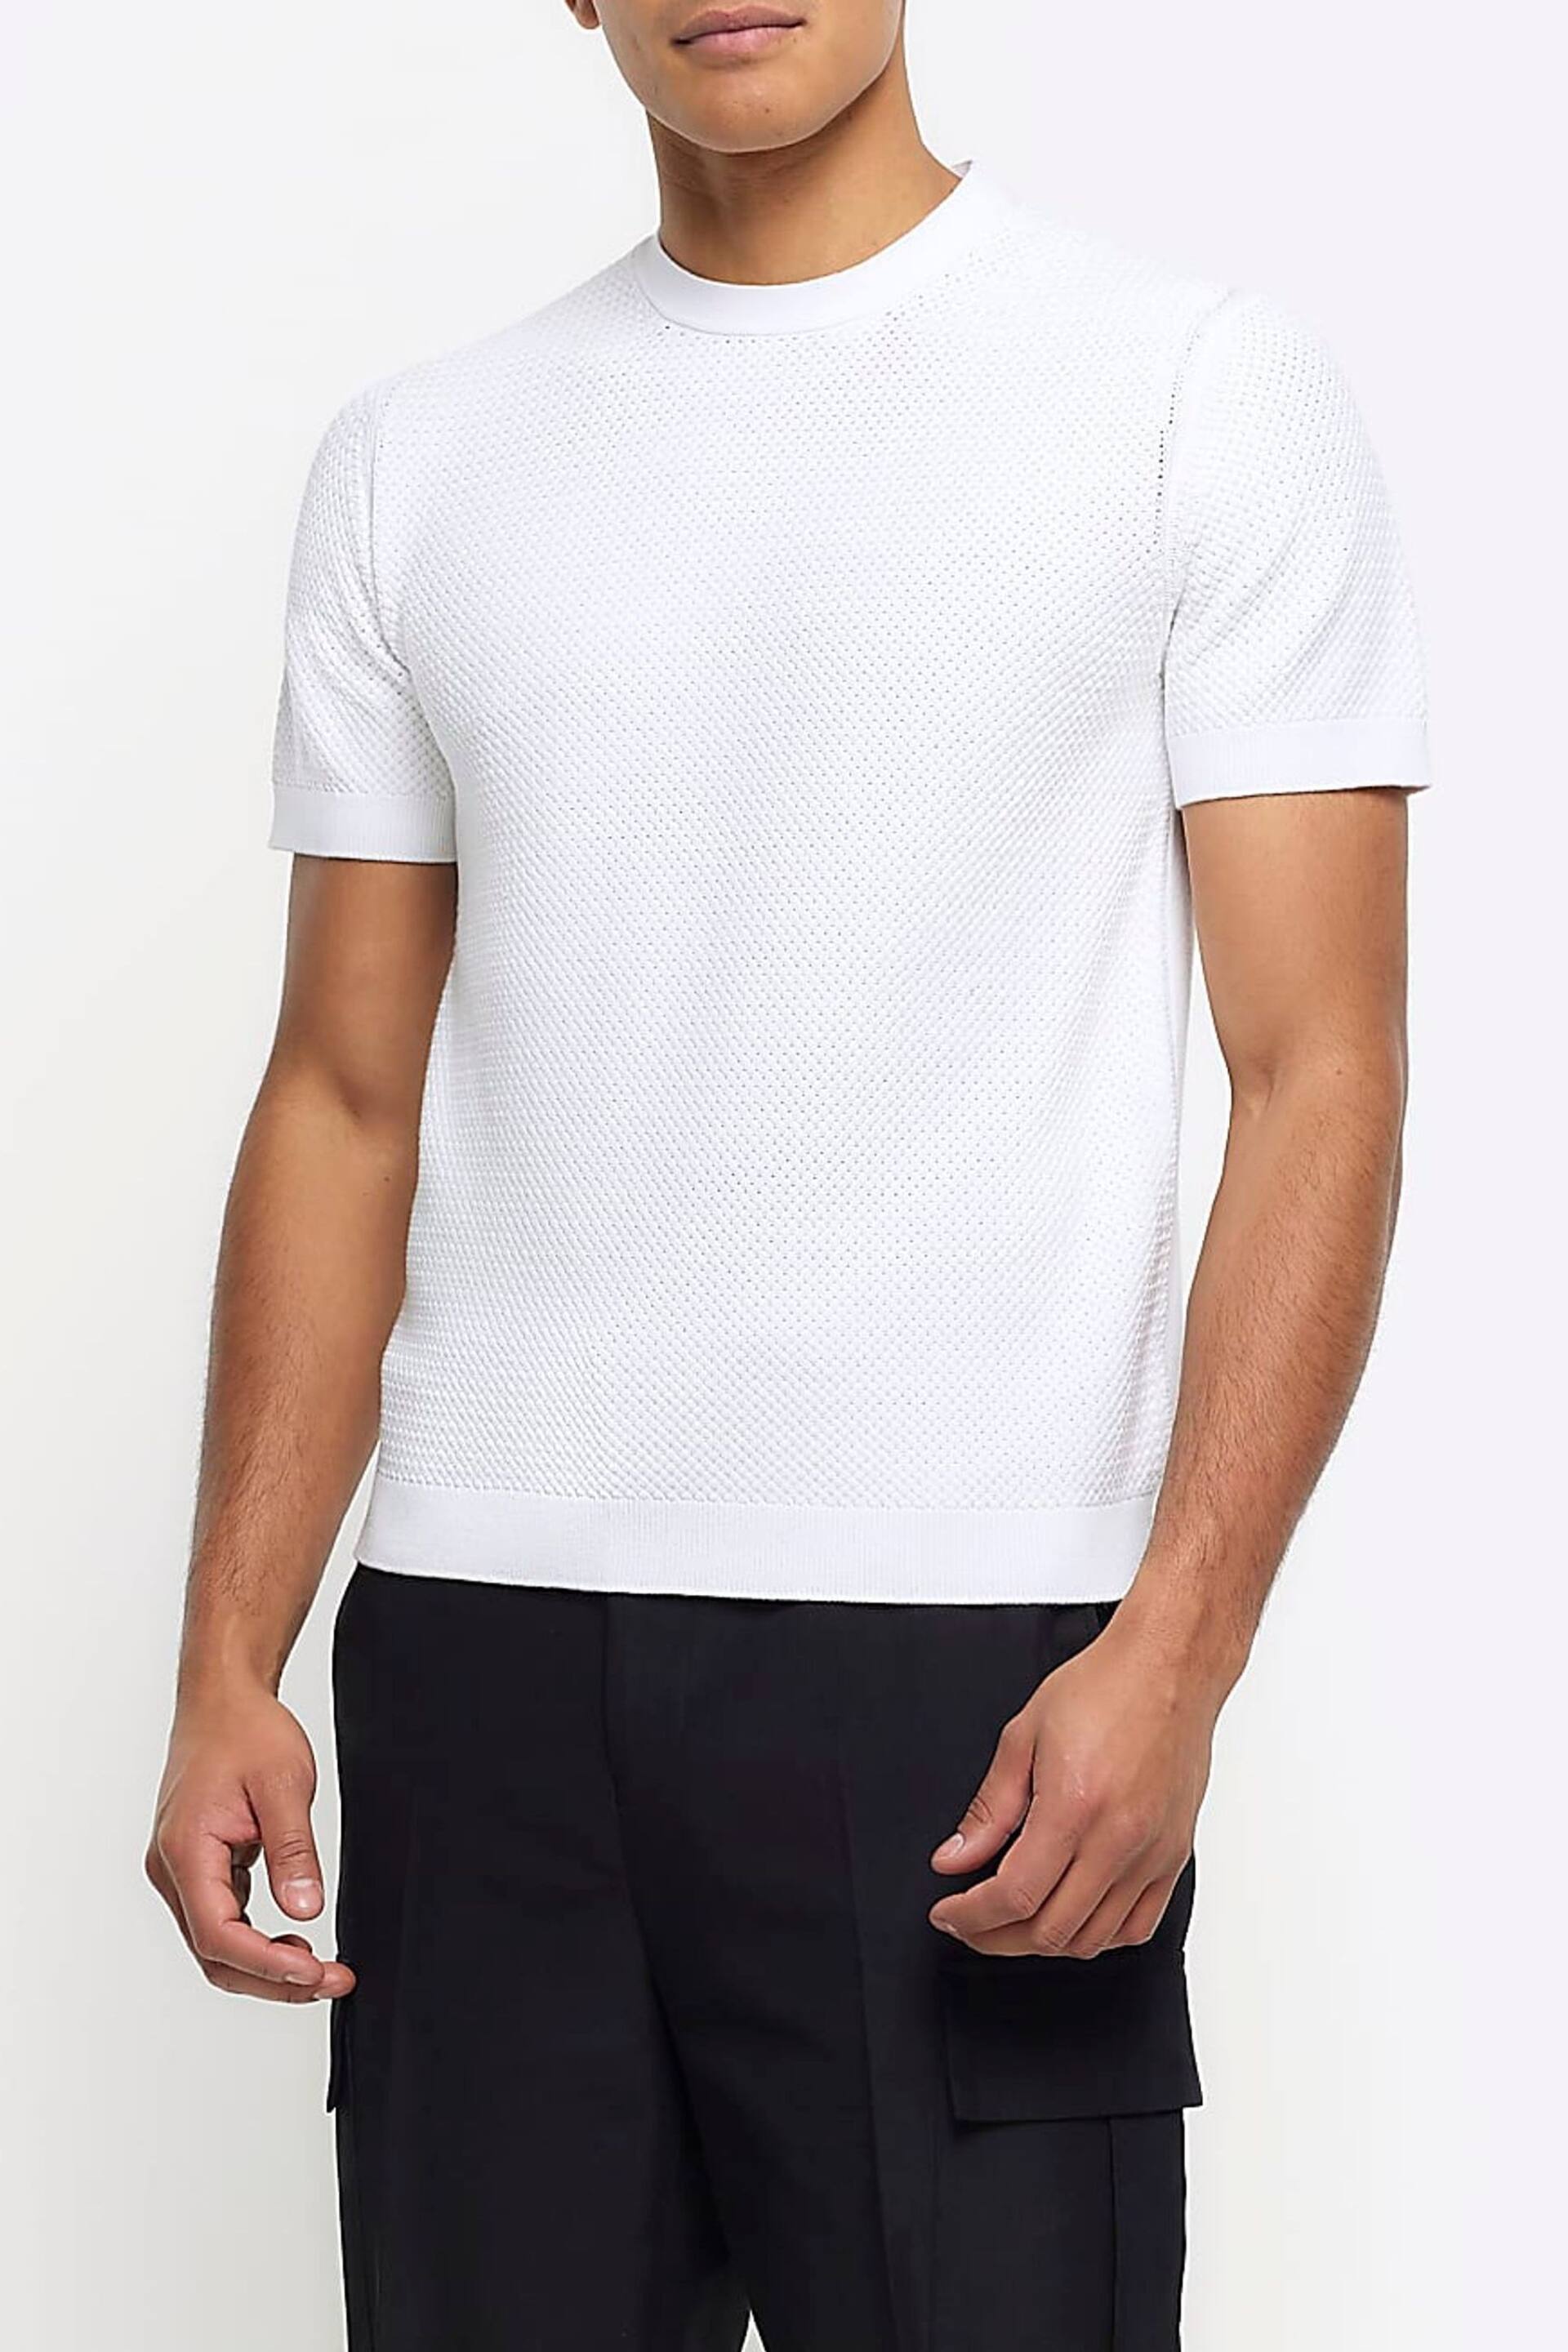 River Island White Textured Knitted T-Shirt - Image 1 of 3